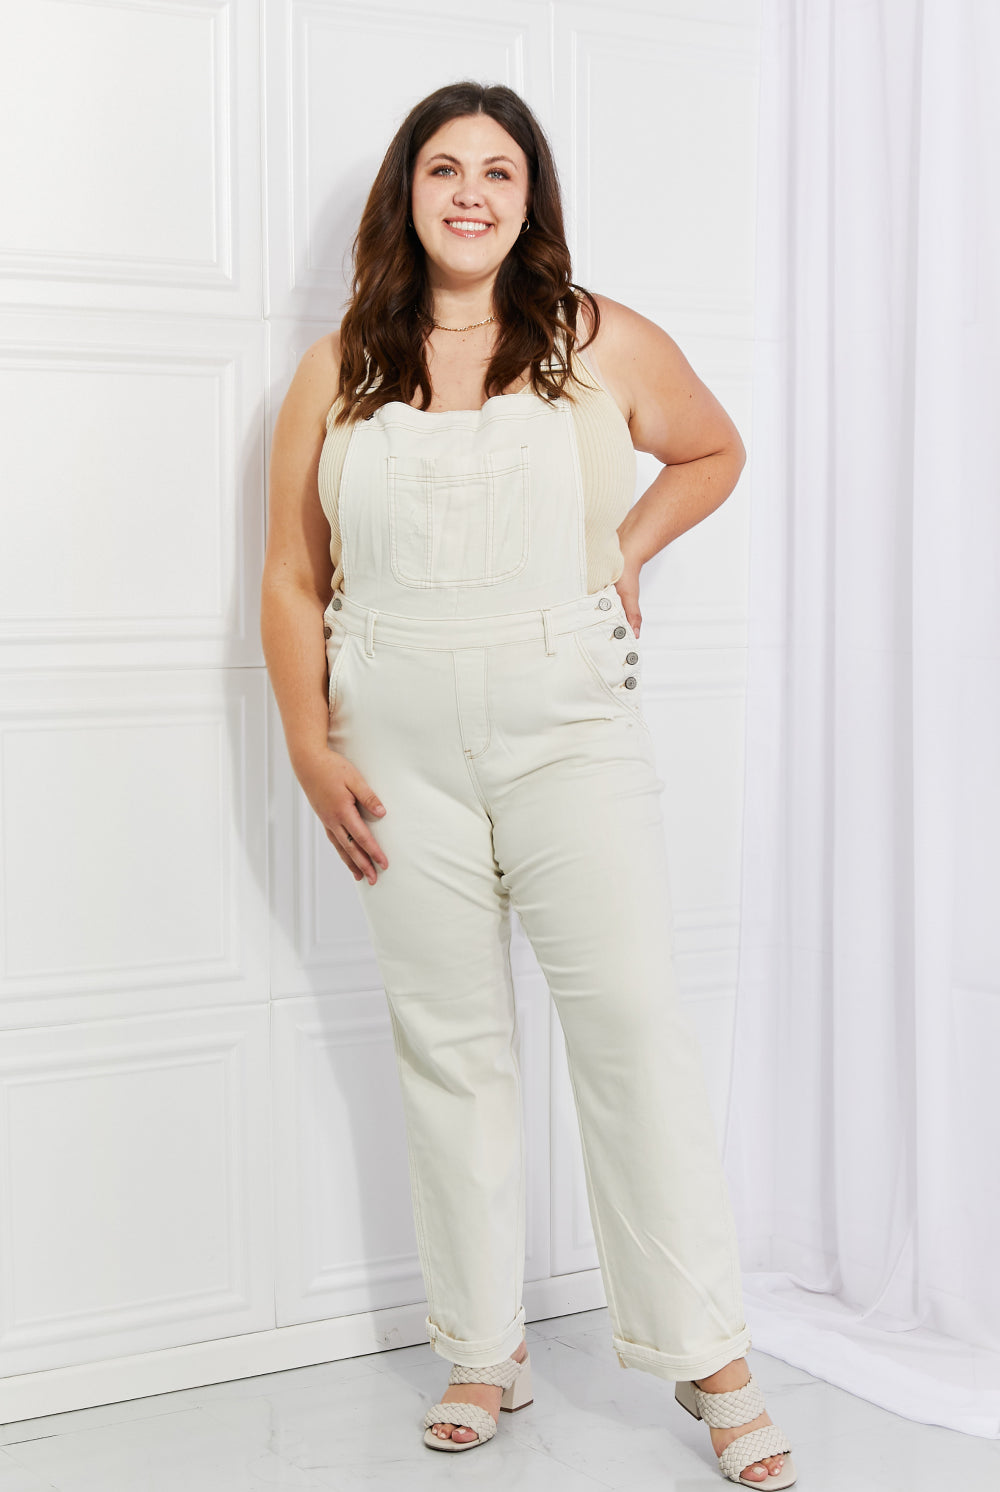 Light Gray White Orchard Judy Blue Full Size Taylor High Waist Overalls Overalls